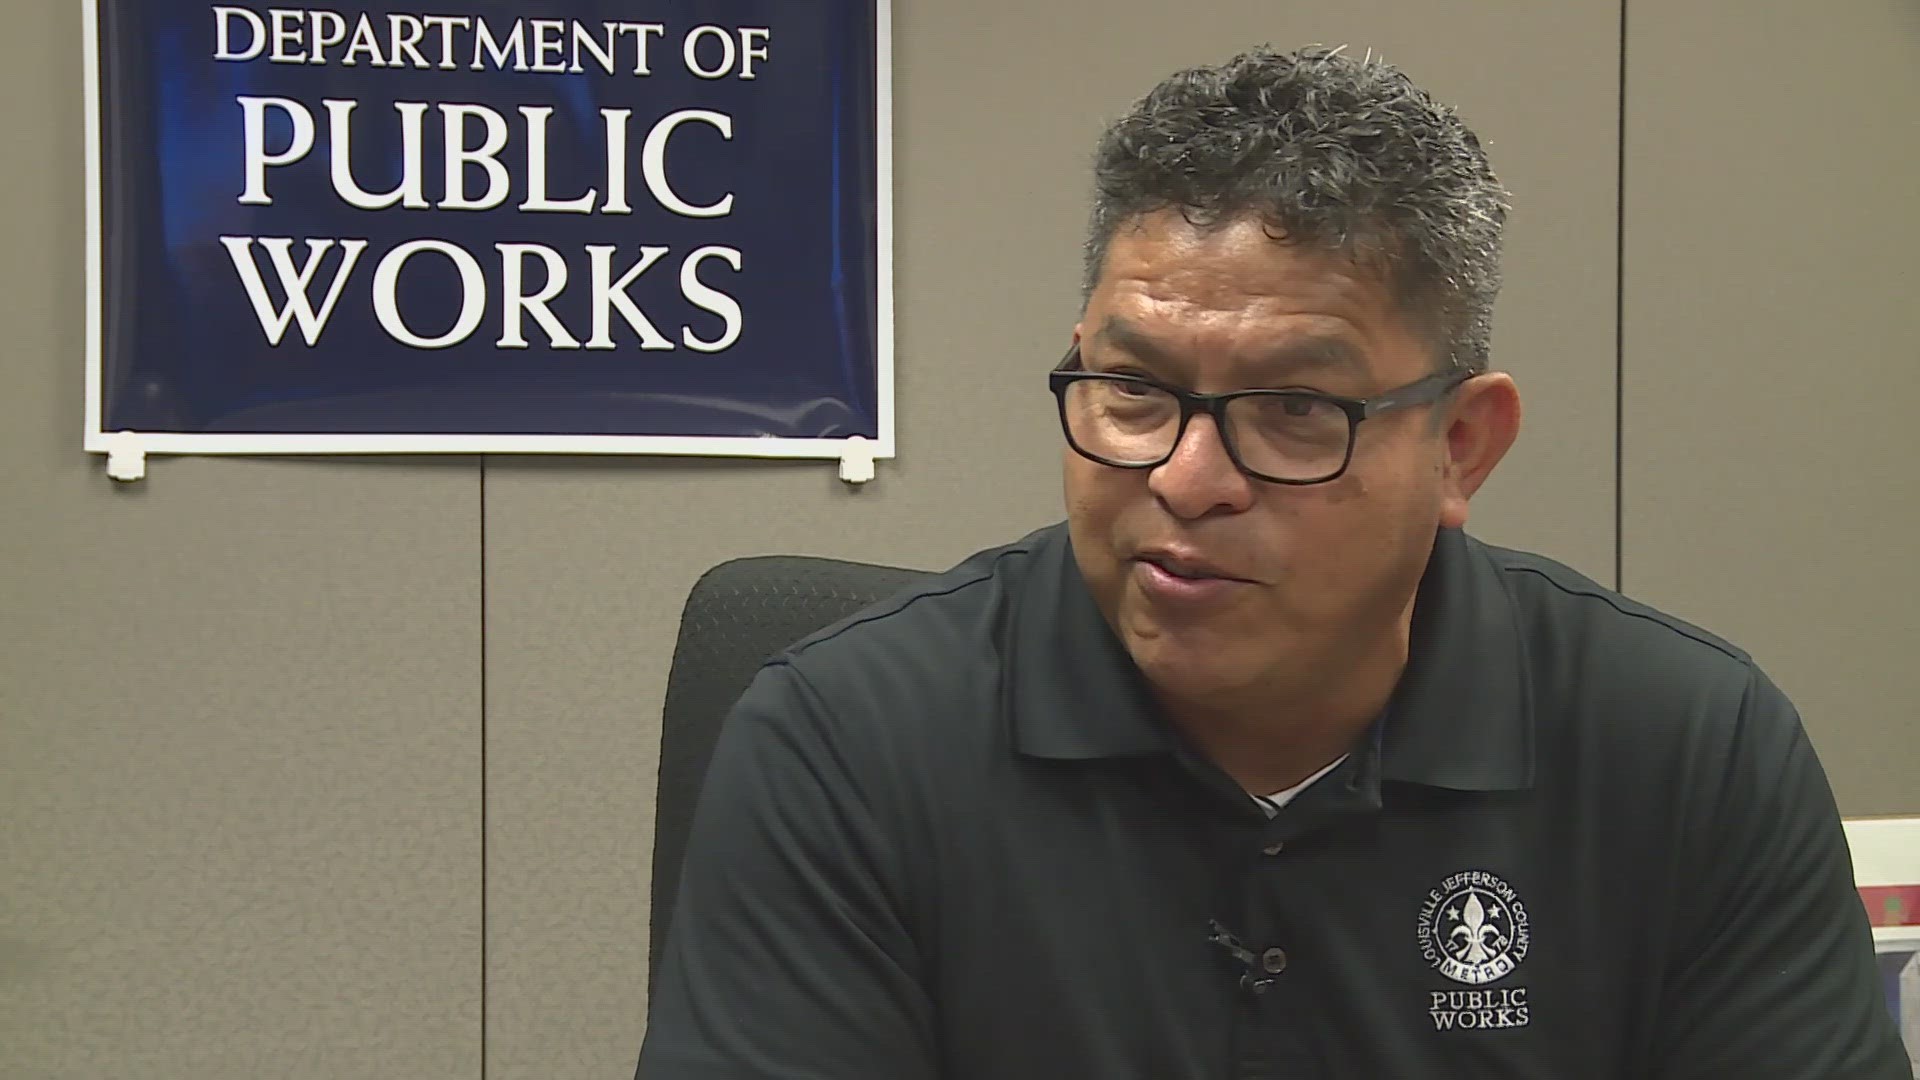 Salvador 'Sal' Melendez is currently the public information officer for Metro Public Works, but his road to that position was not an easy one.